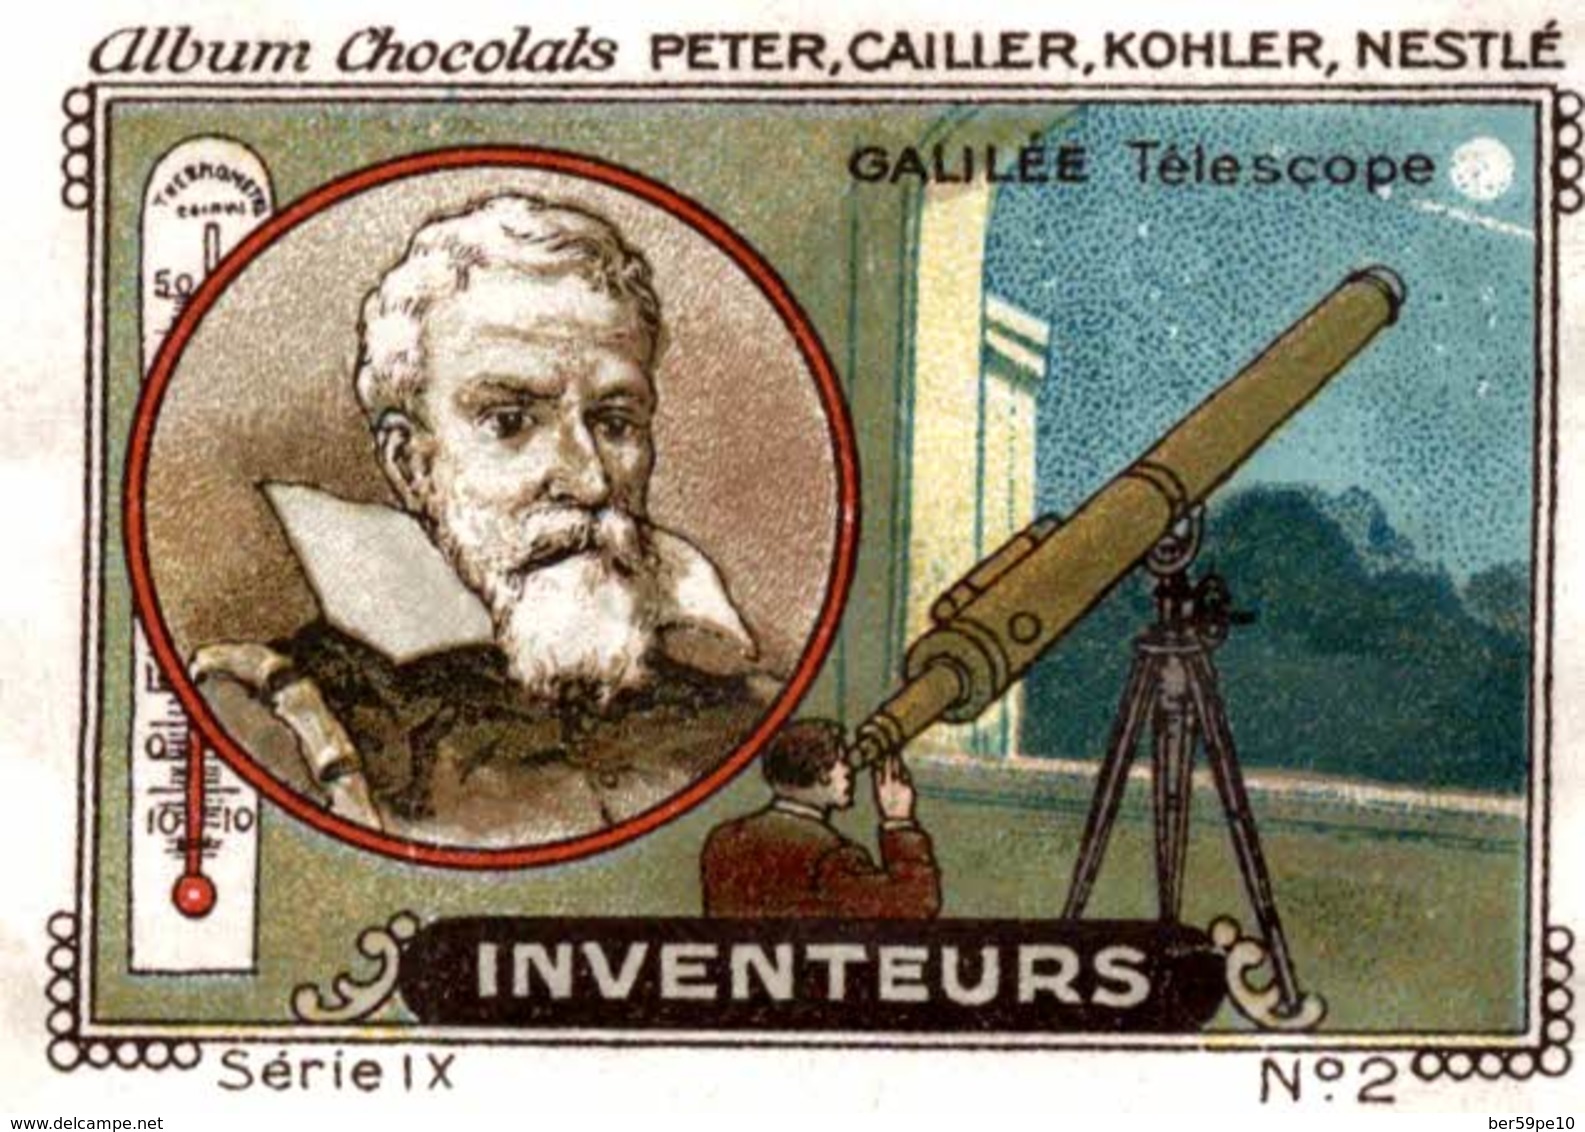 CHROMO CHOCOLATS PETER CAILLER KOHLER NESTLE INVENTEURS N° 2 GALILEE TELESCOPE - Other & Unclassified